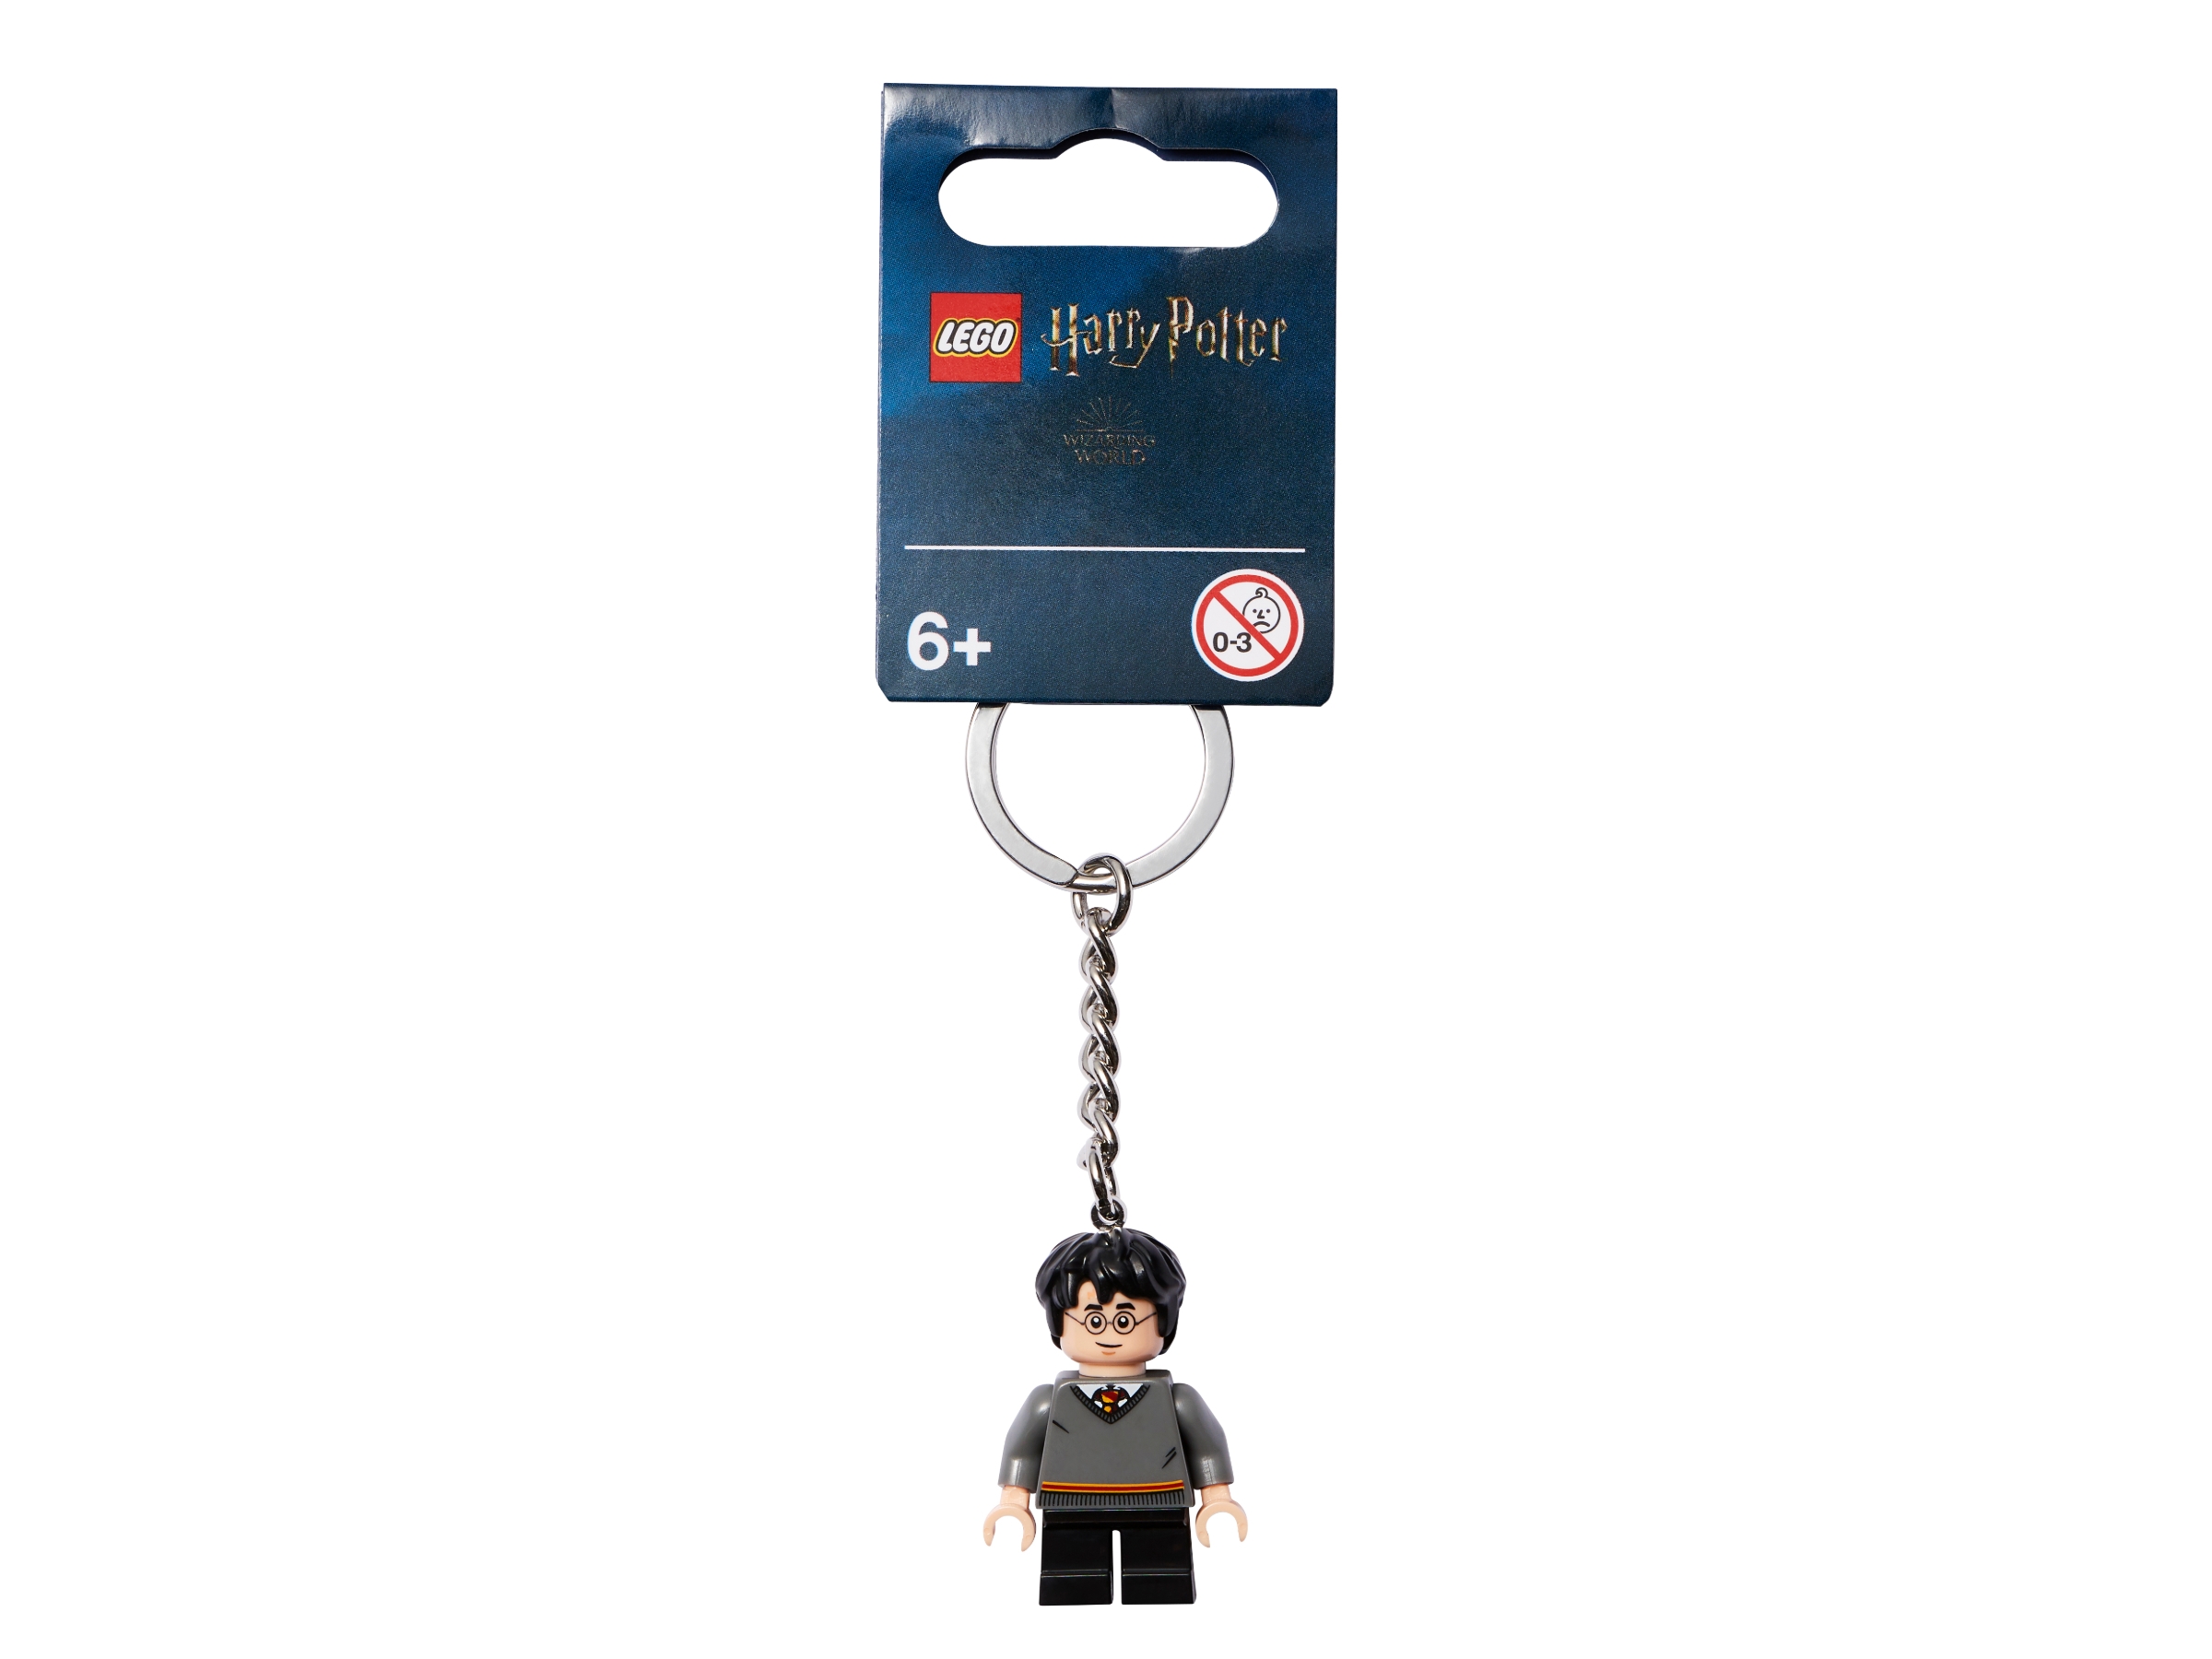 CHOOSE YOUR OWN GENUINE LEGO FIGURES HARRY POTTER MINIFIGURE KEY RINGS 